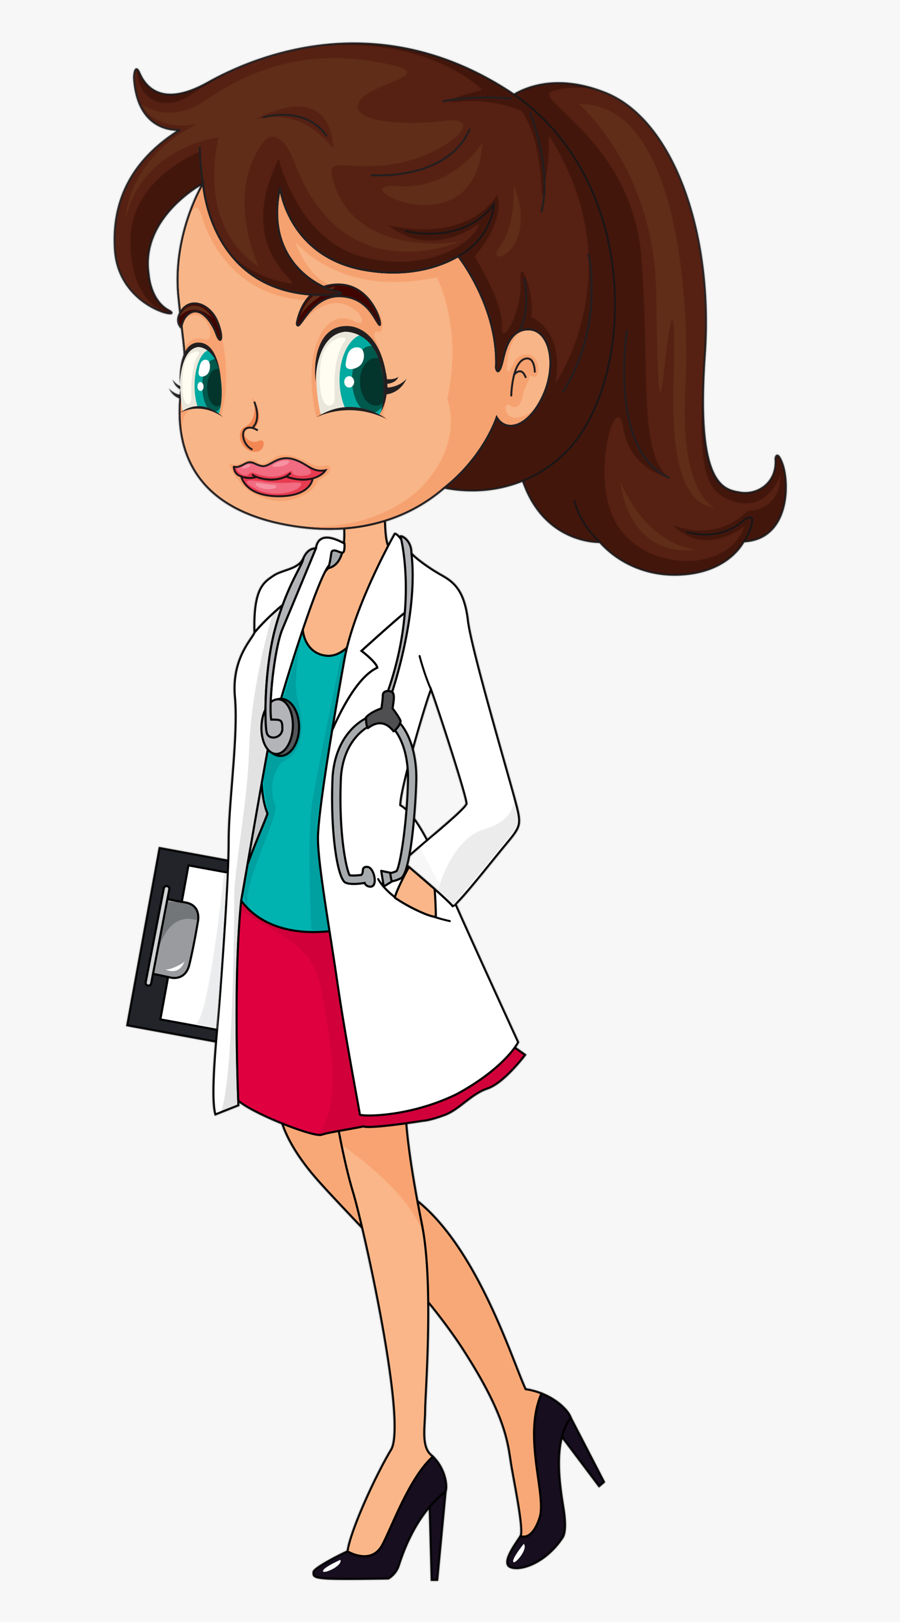 Doctor Girl Clipart, Transparent Clipart